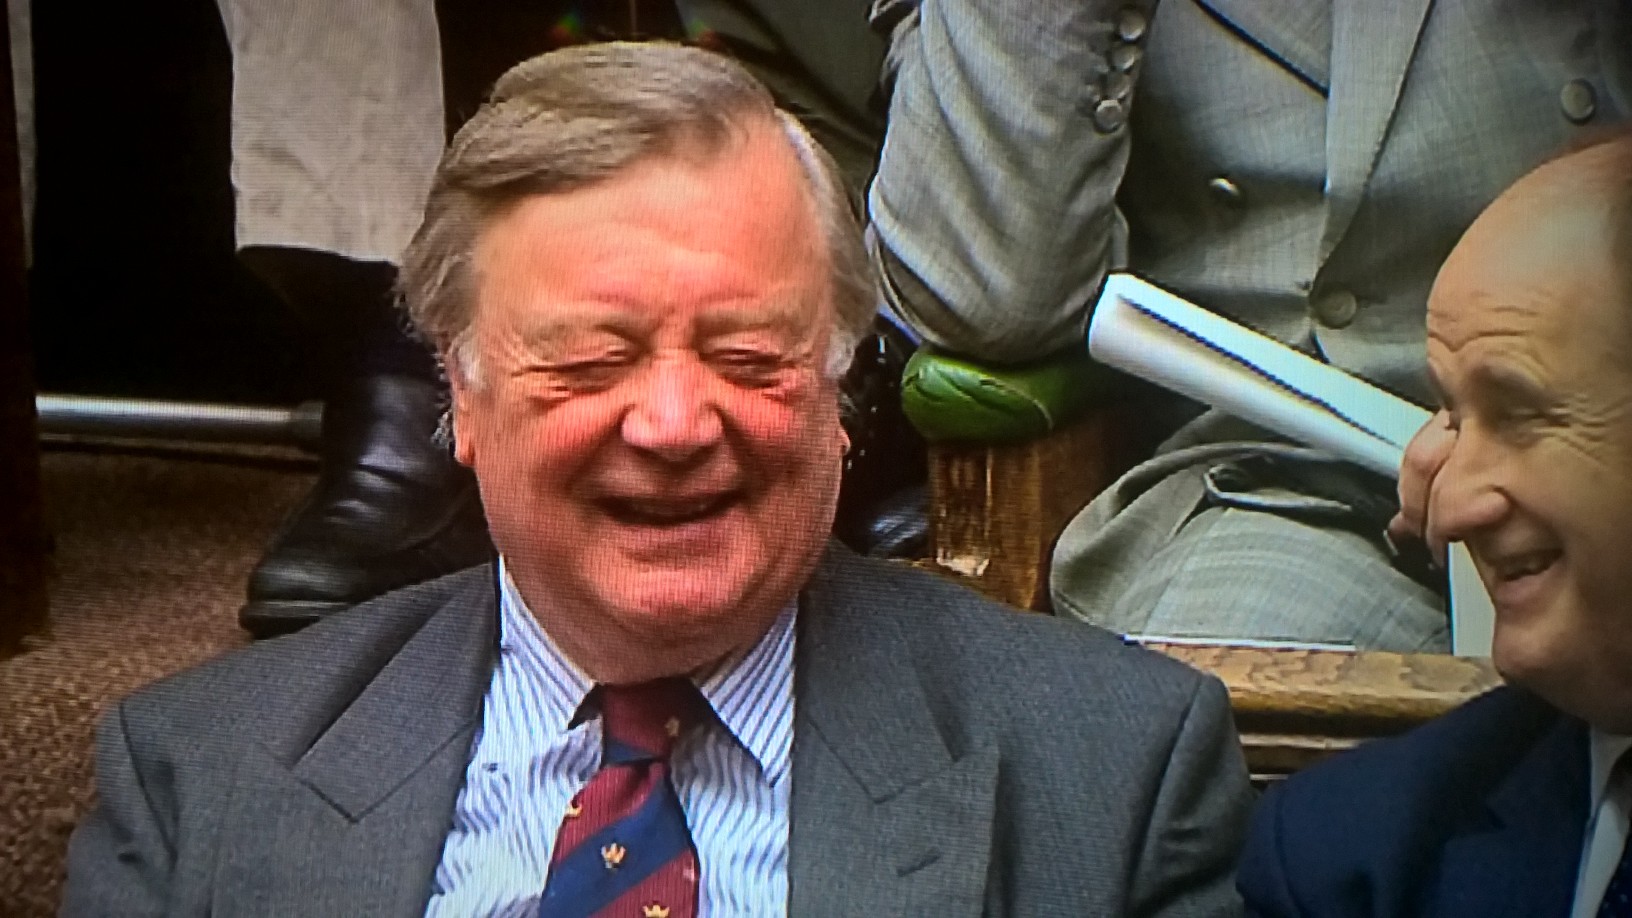 Ken Clarke chuckles as he is reminded of hat he said